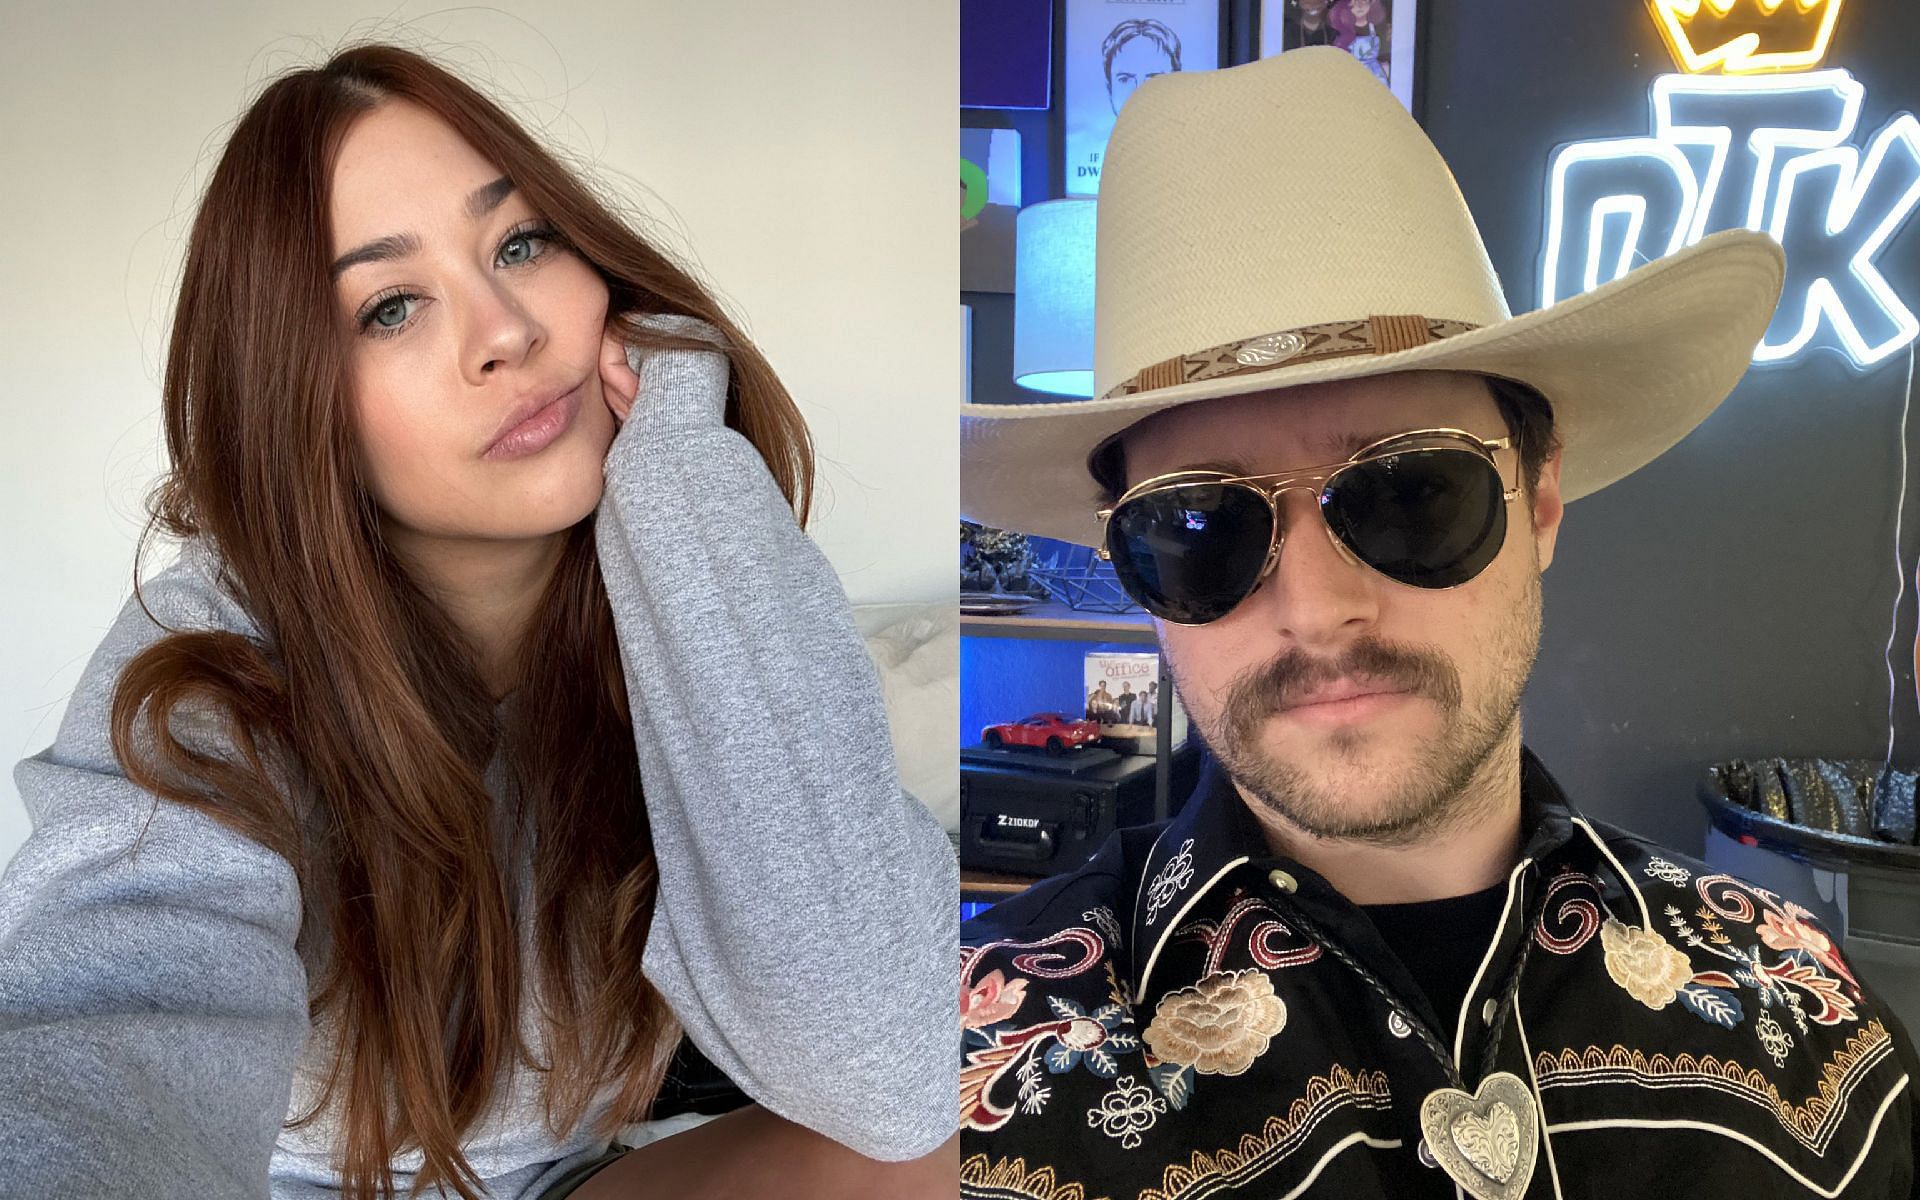 Twitch streamer Azalialexi details harrowing experience after sharing her story involving Rich Campbell (Images via Azalialexi and Rich Campbell/Twitter)